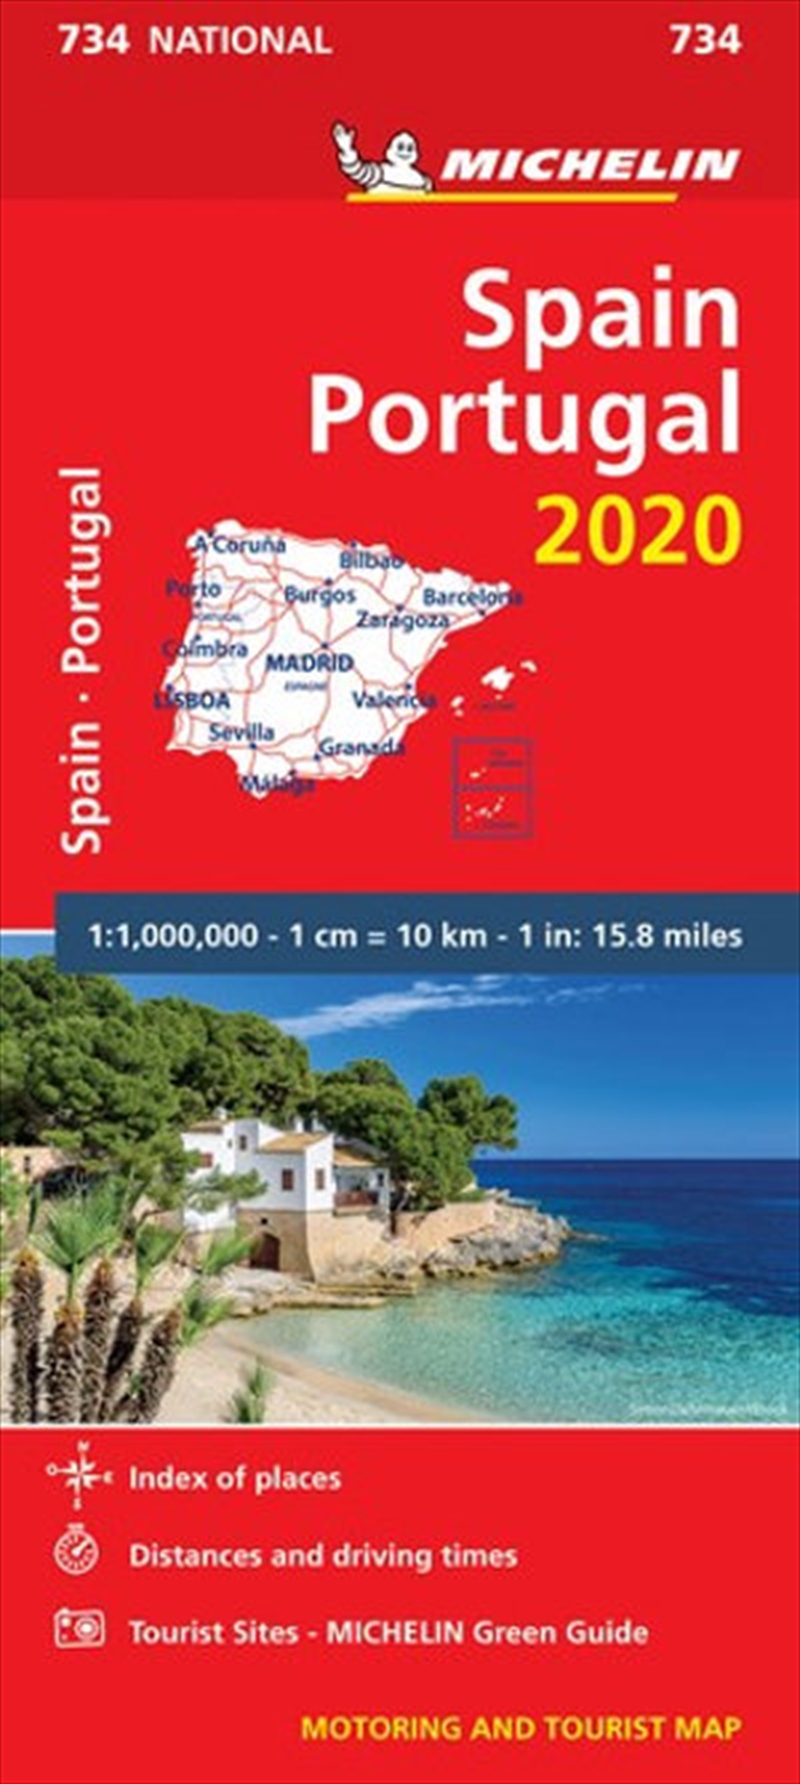 Spain & Portugal 2020 Michelin National Road Map 734 | Sheet Map